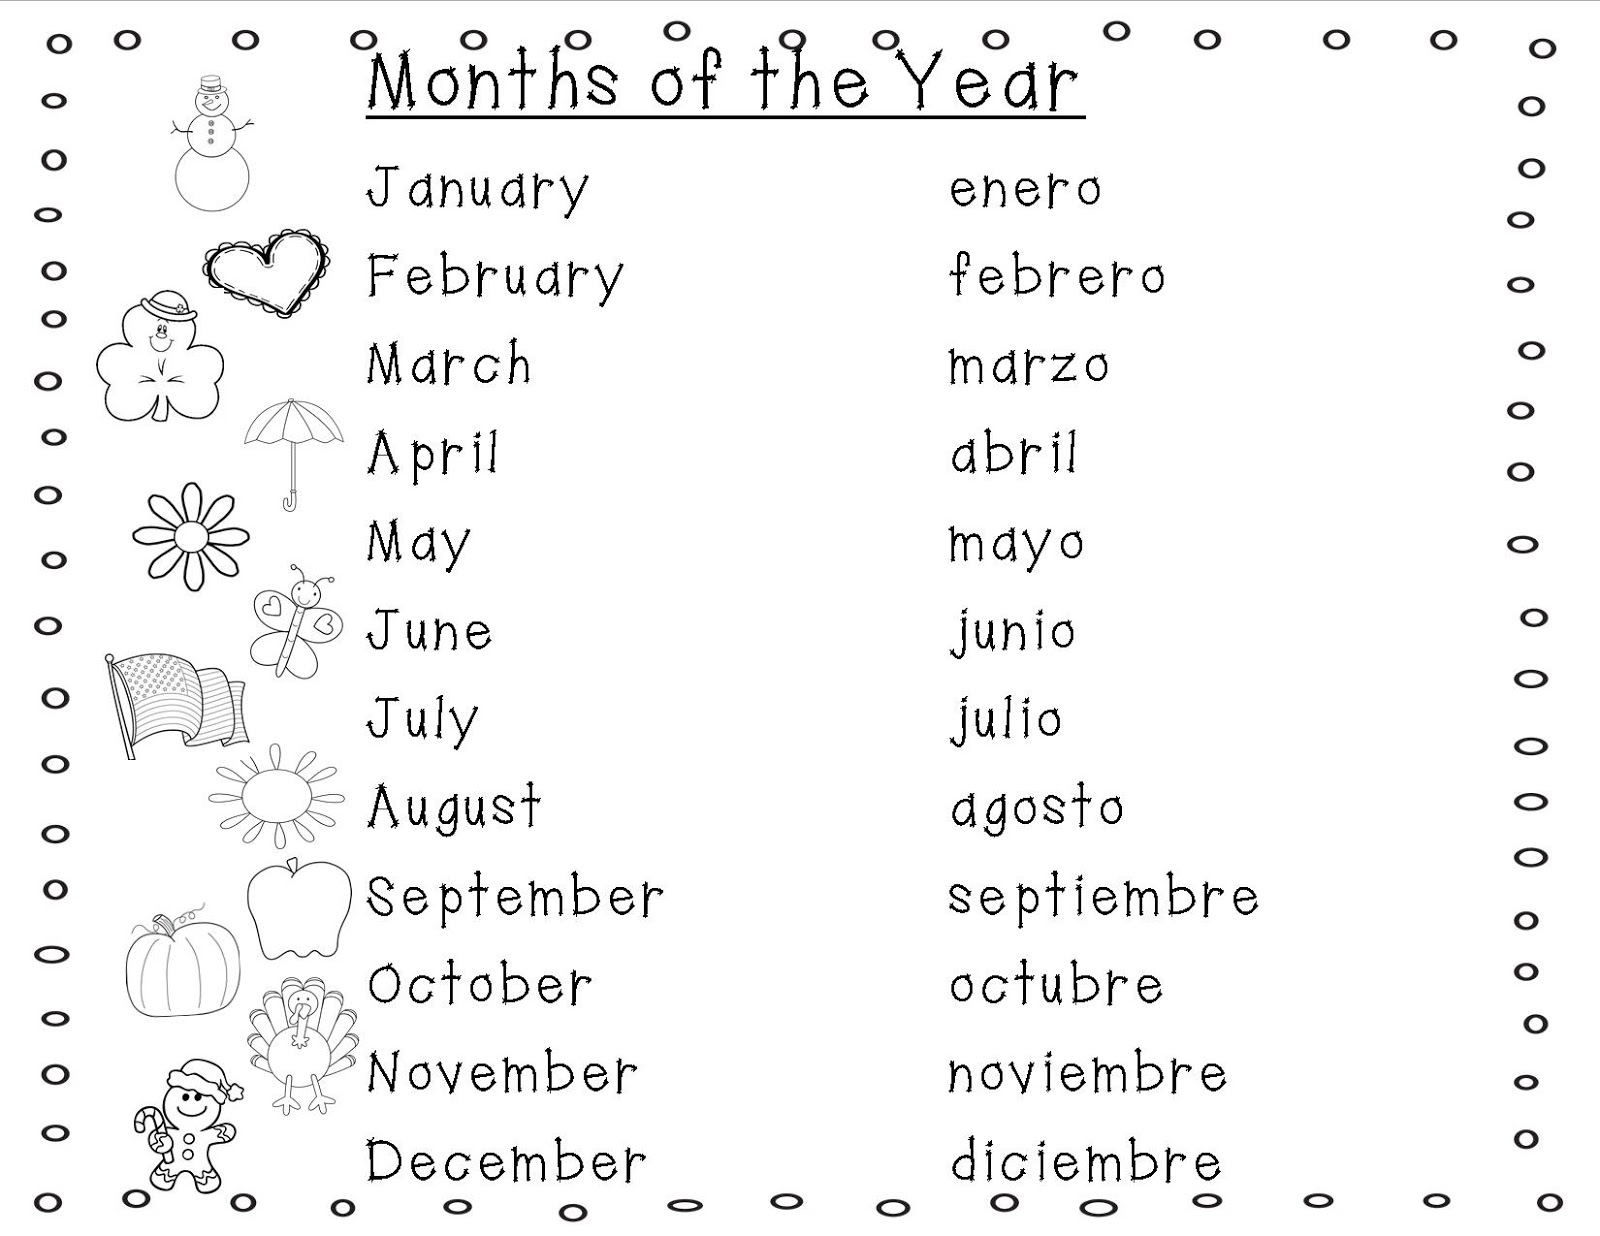 Spanish Day/months/seasons - Lessons - Tes Teach Calendar Month In Spanish